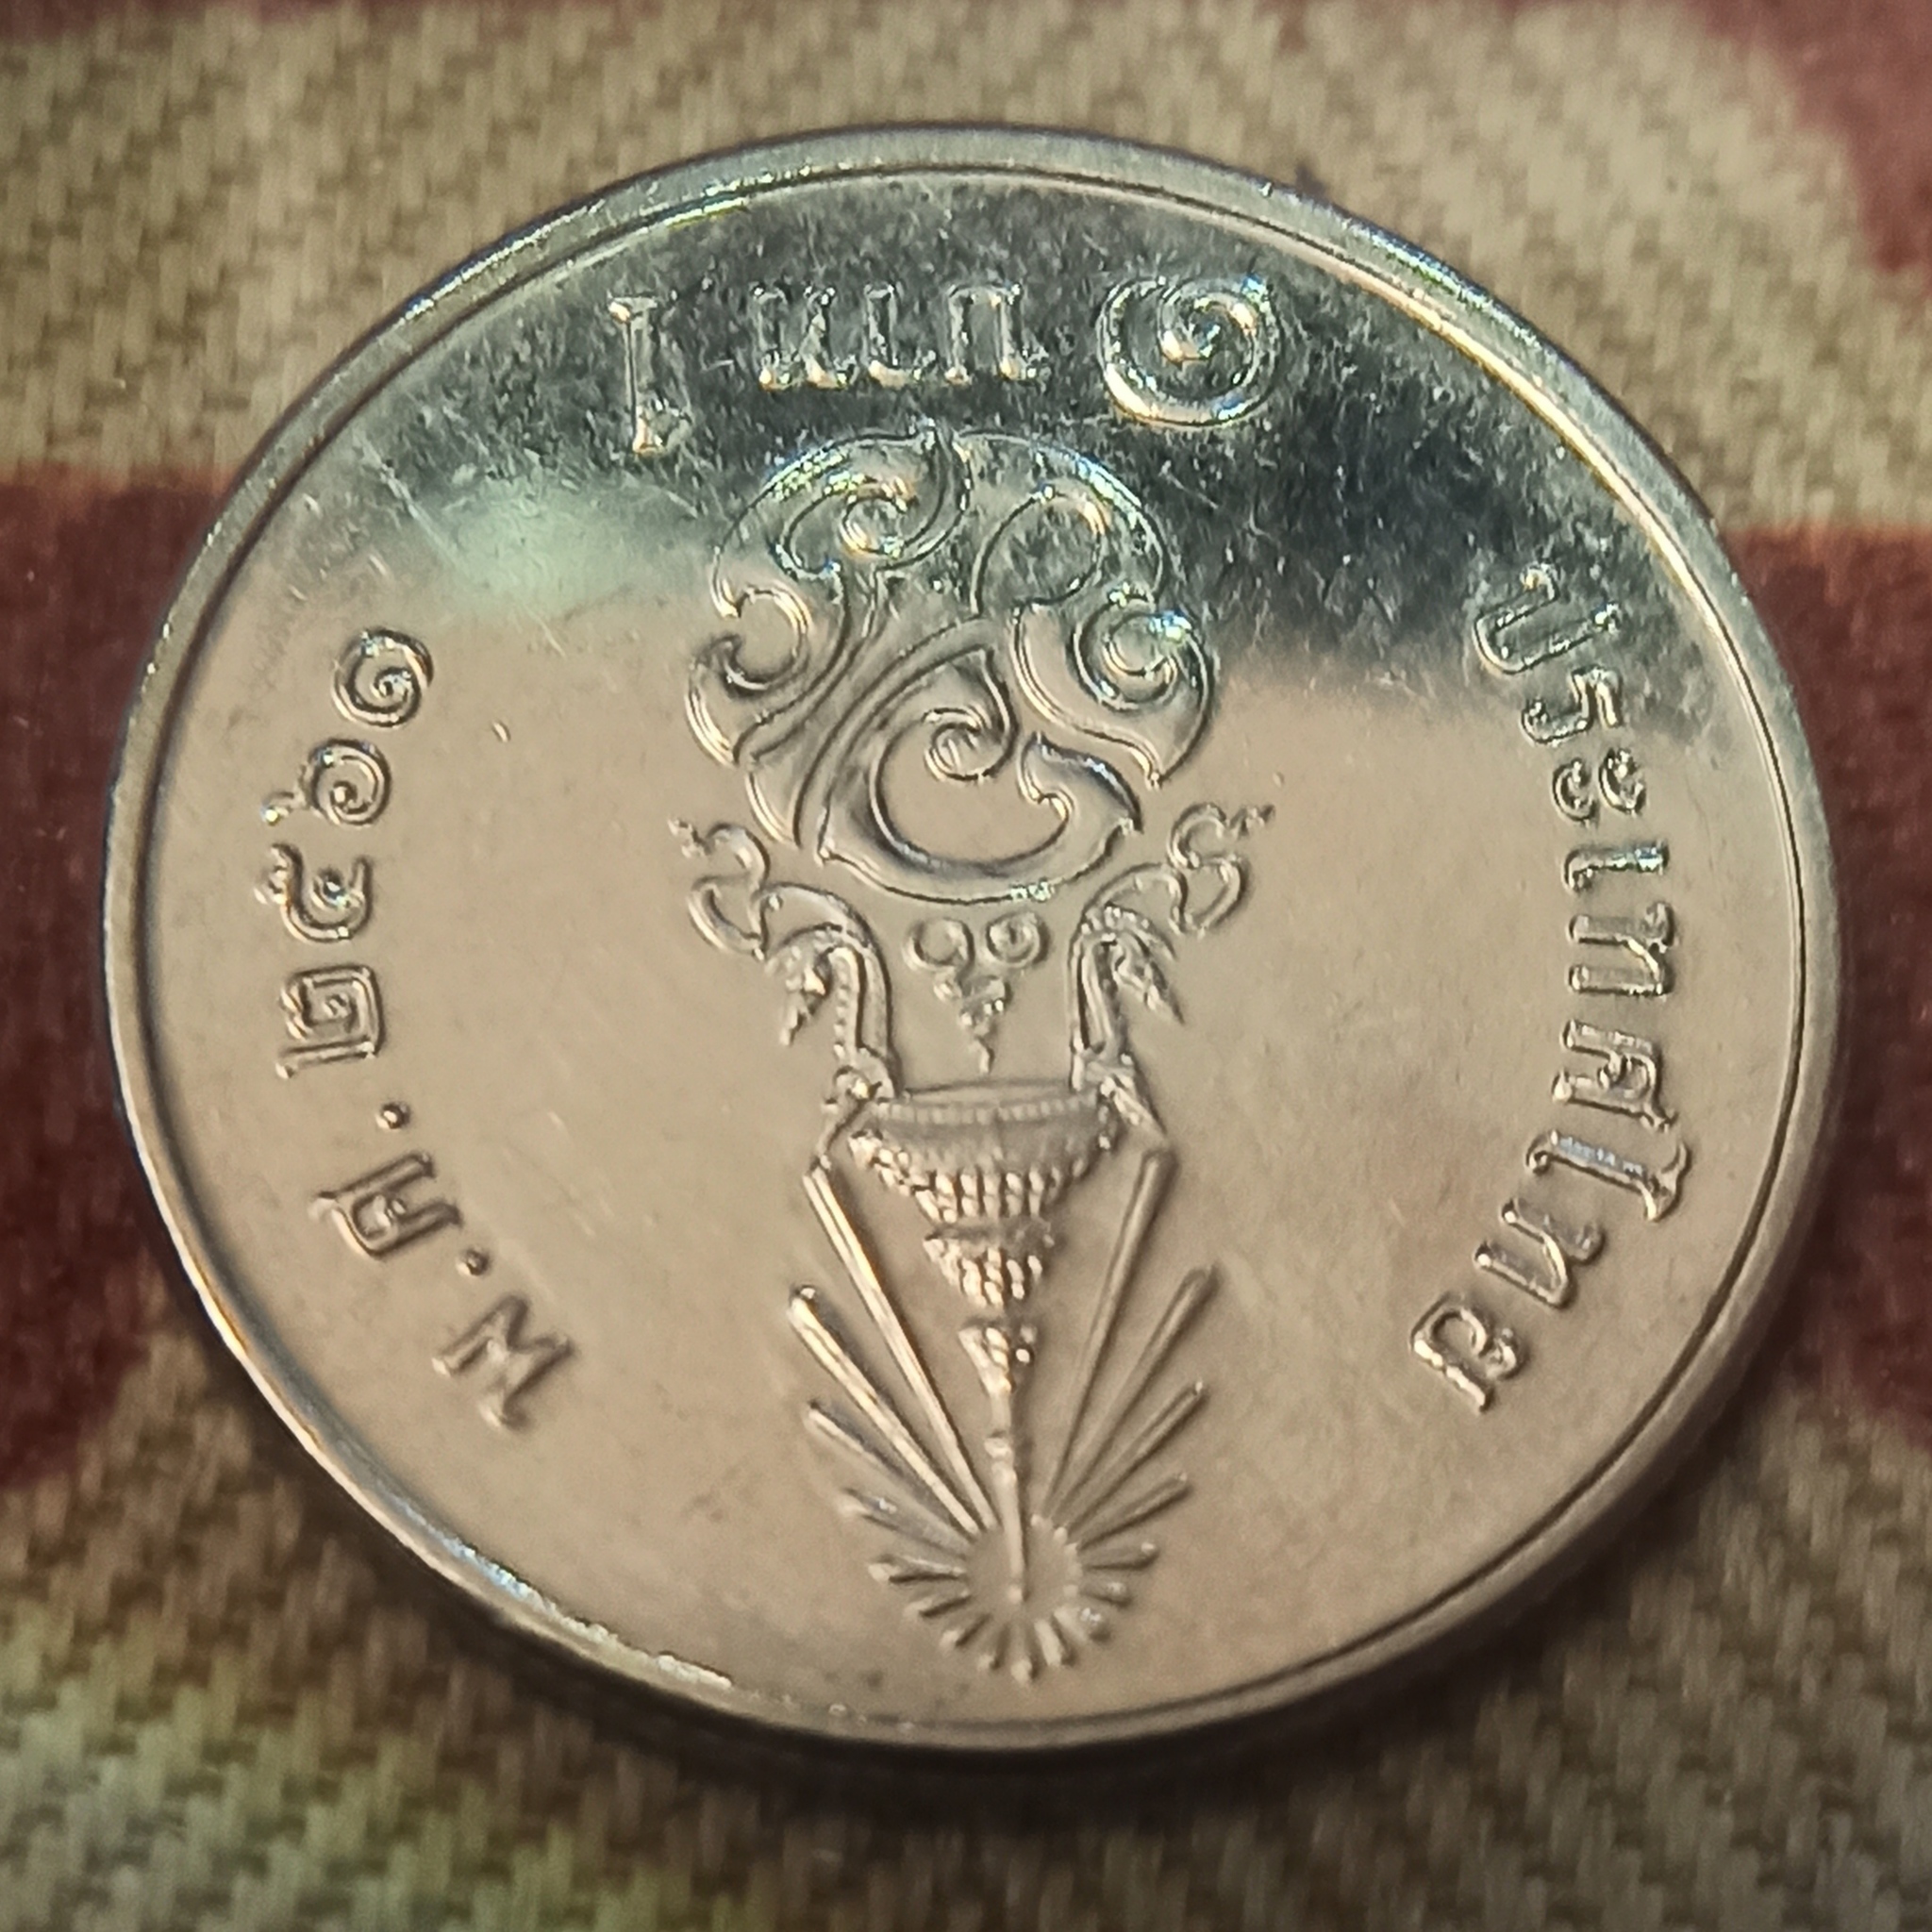 Help identify the coin - My, Coin, What a coin